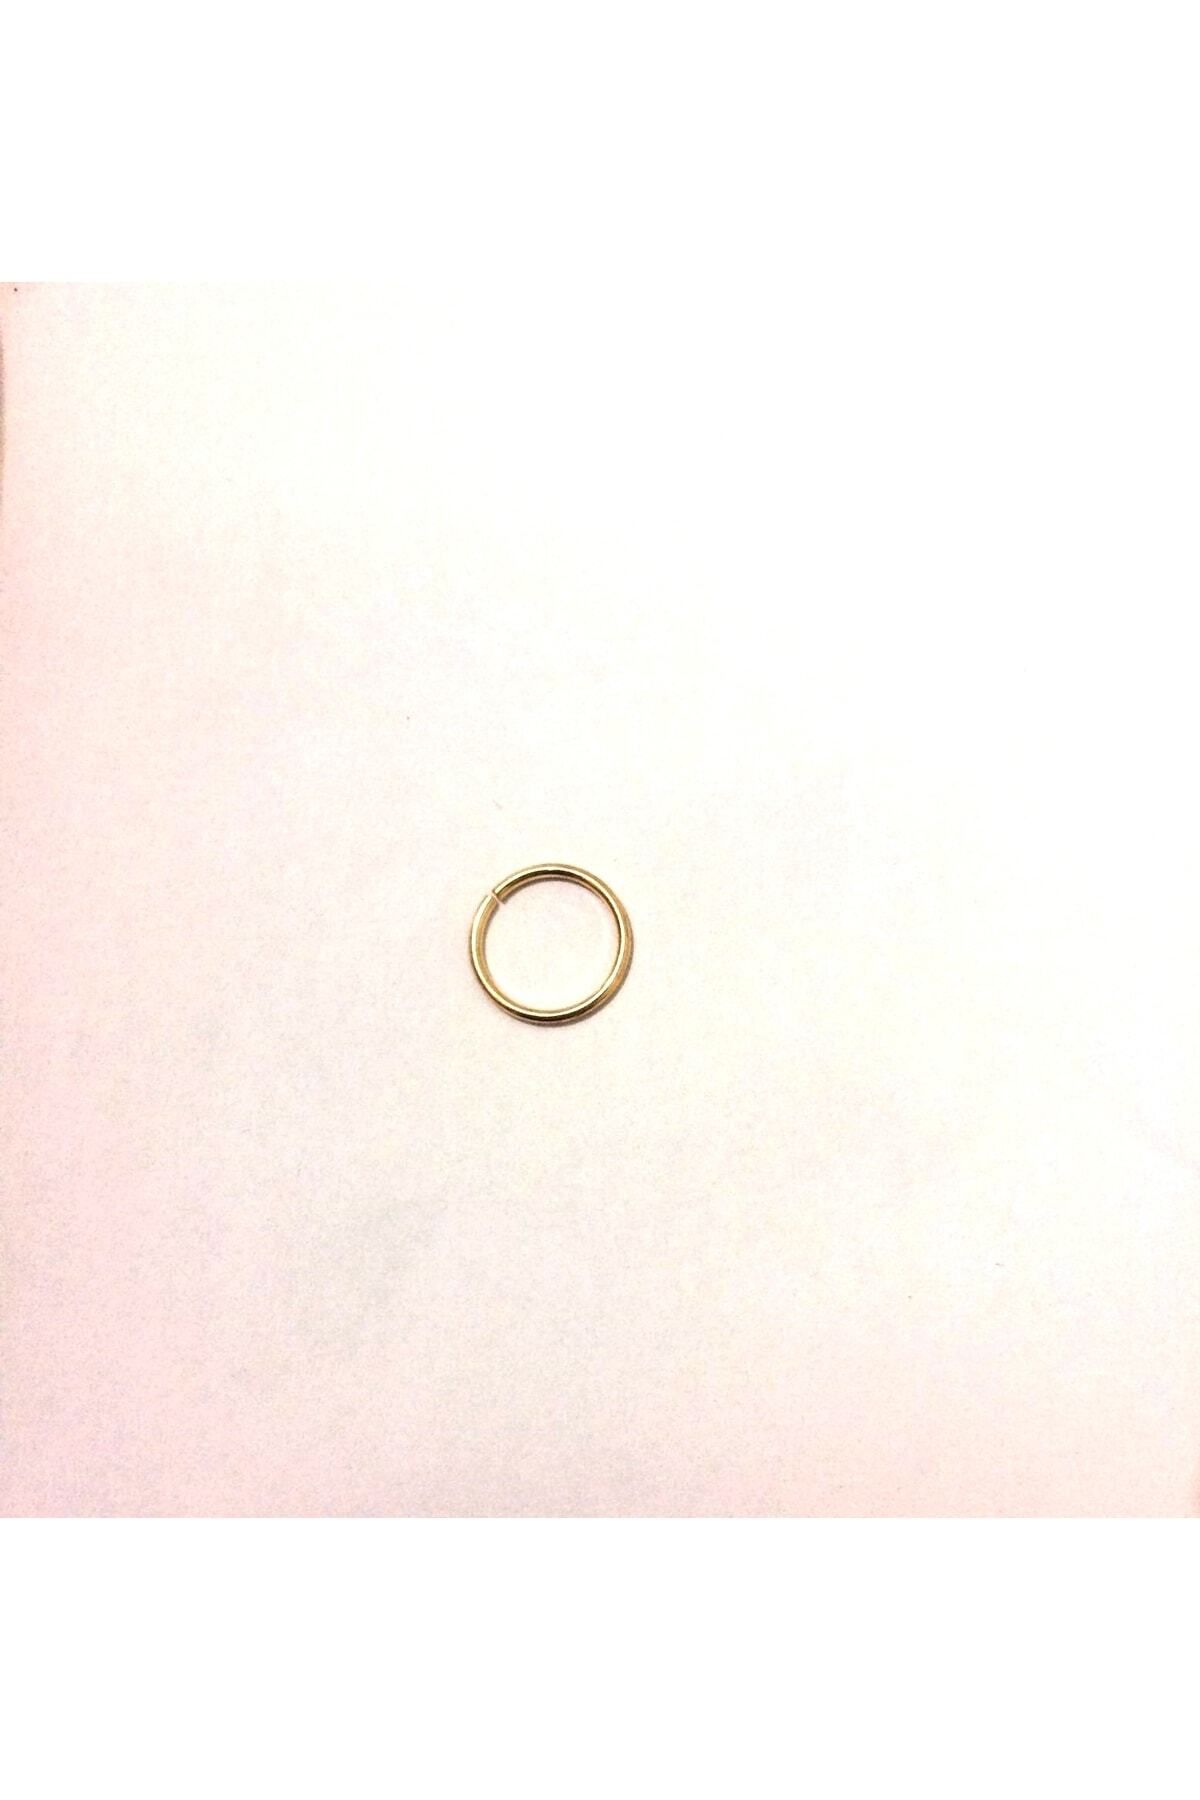 Buy Very Thin Nose Ring in 9ct Gold and Sterling Silver , 0.4mm/26 GAUGE,  Earring, Hypoallergenic, Septum Ring, Piercing, Hoop, Freepost Online in  India - Etsy